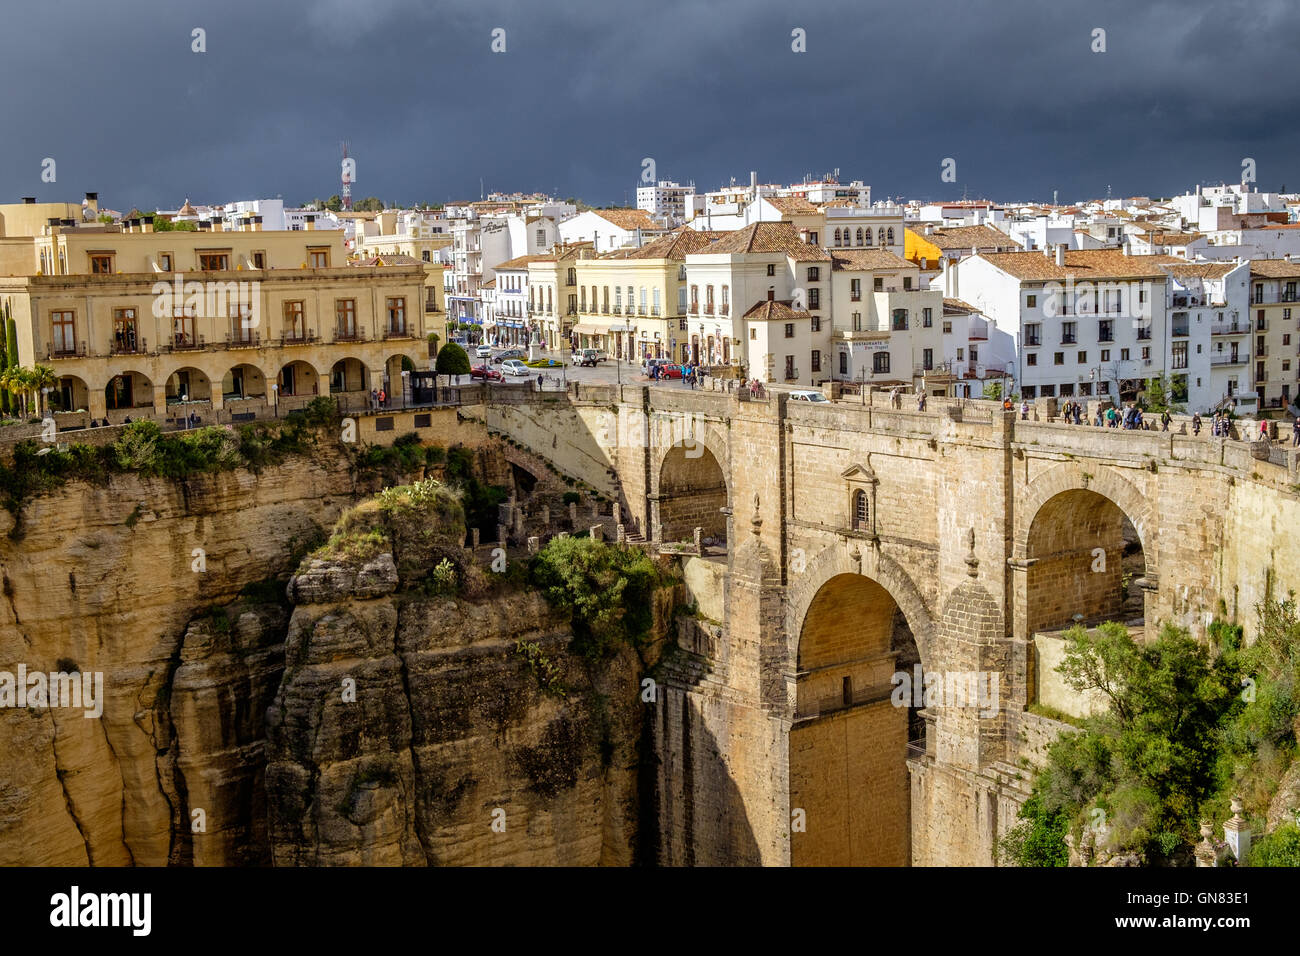 The Puente Nuevo bridge spanning the Guadalevin River and dividing the city of Ronda in southern Spain Stock Photo